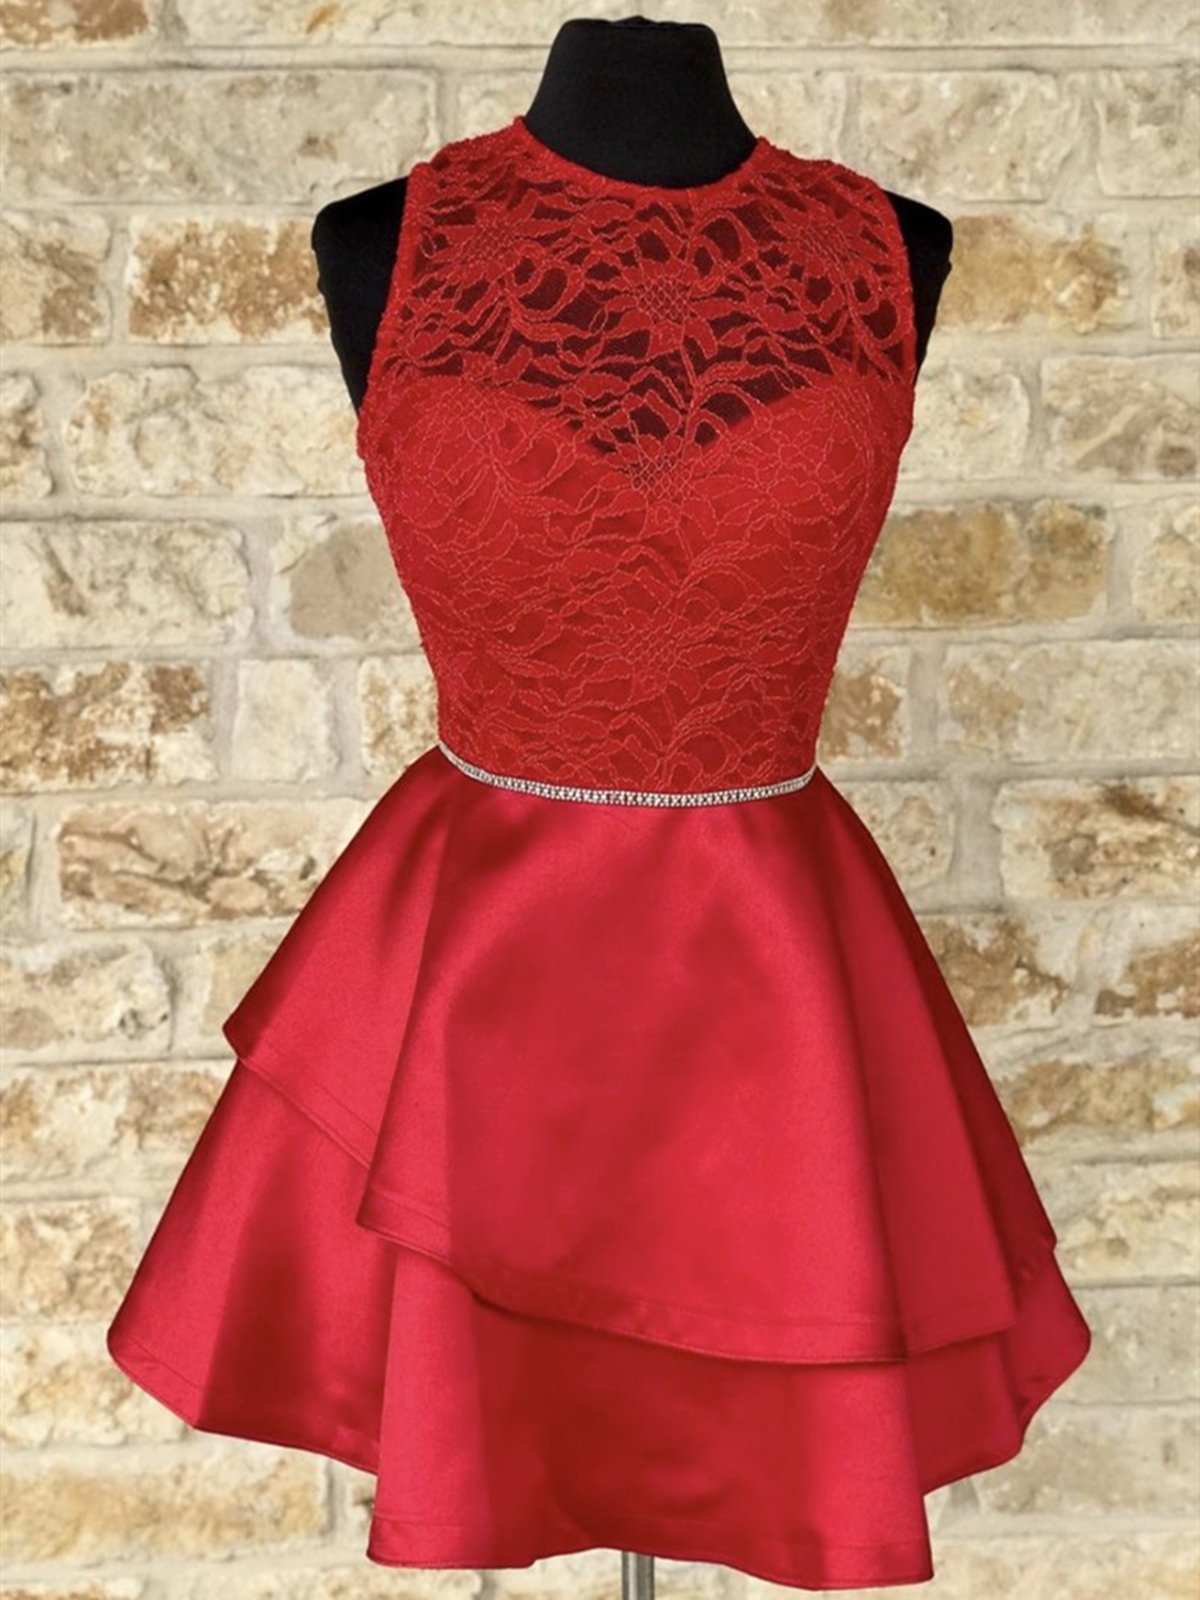 Short Red Lace Prom Dresses For Black girls For Women, Short Red Lace Formal Homecoming Dresses